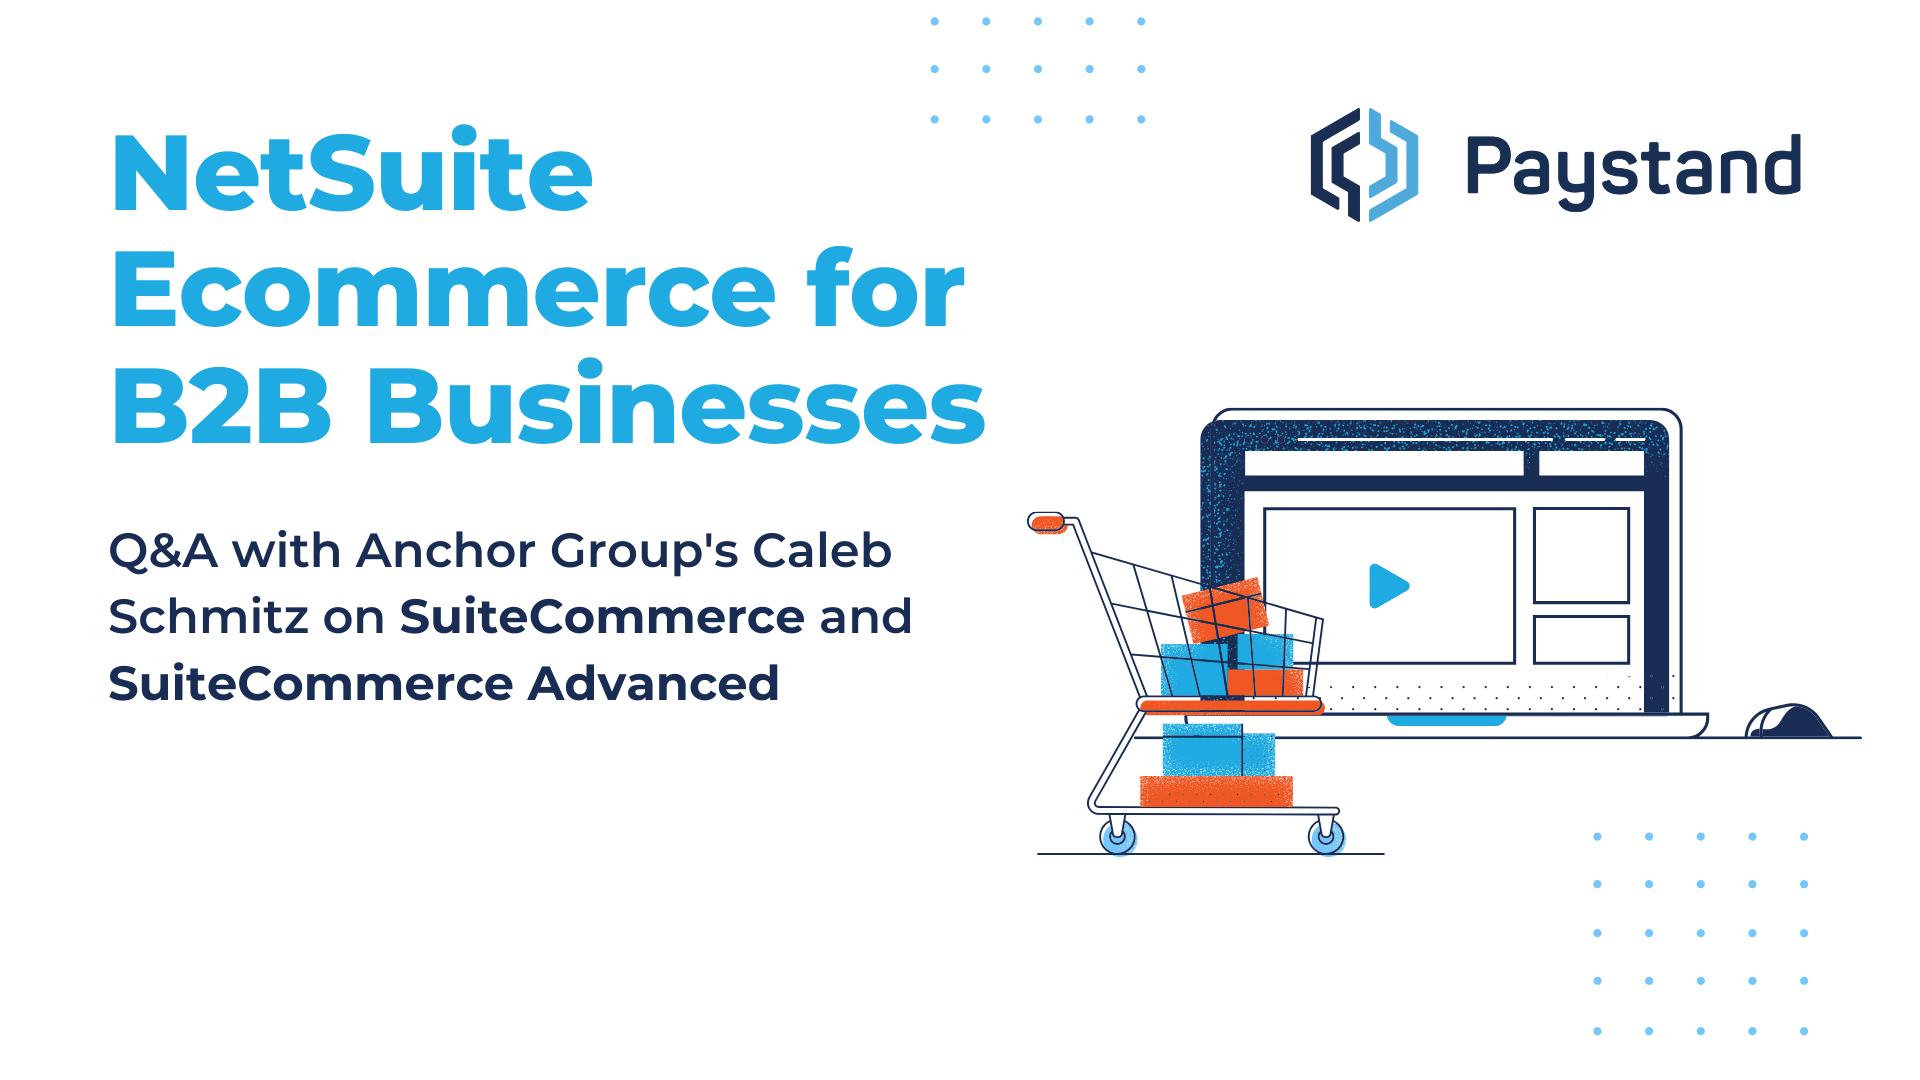 B2B Ecommerce for NetSuite: Q&A with Caleb Schmitz on SuiteCommerce and SuiteCommerce Advanced